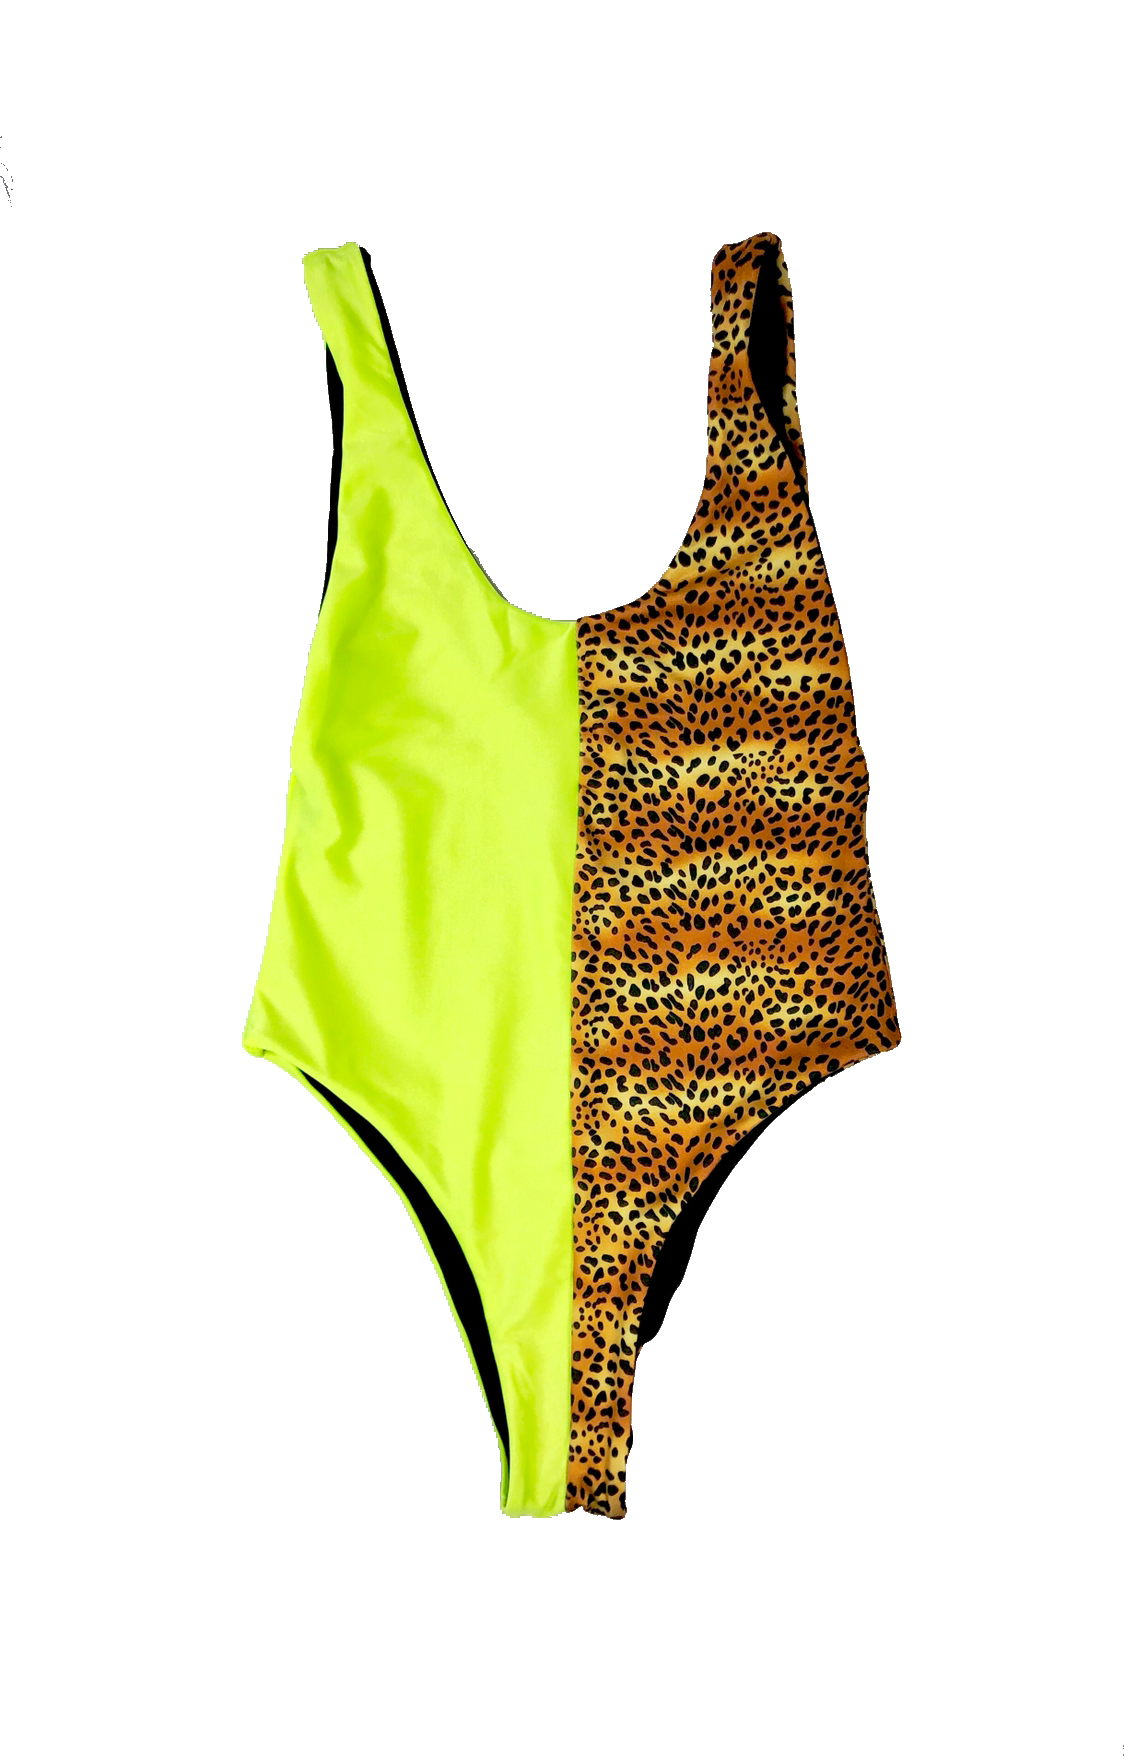 wendolin-designs - Wendolin Designs -  - One Piece Swimsuit Reversible leopard print, neon green and black colors